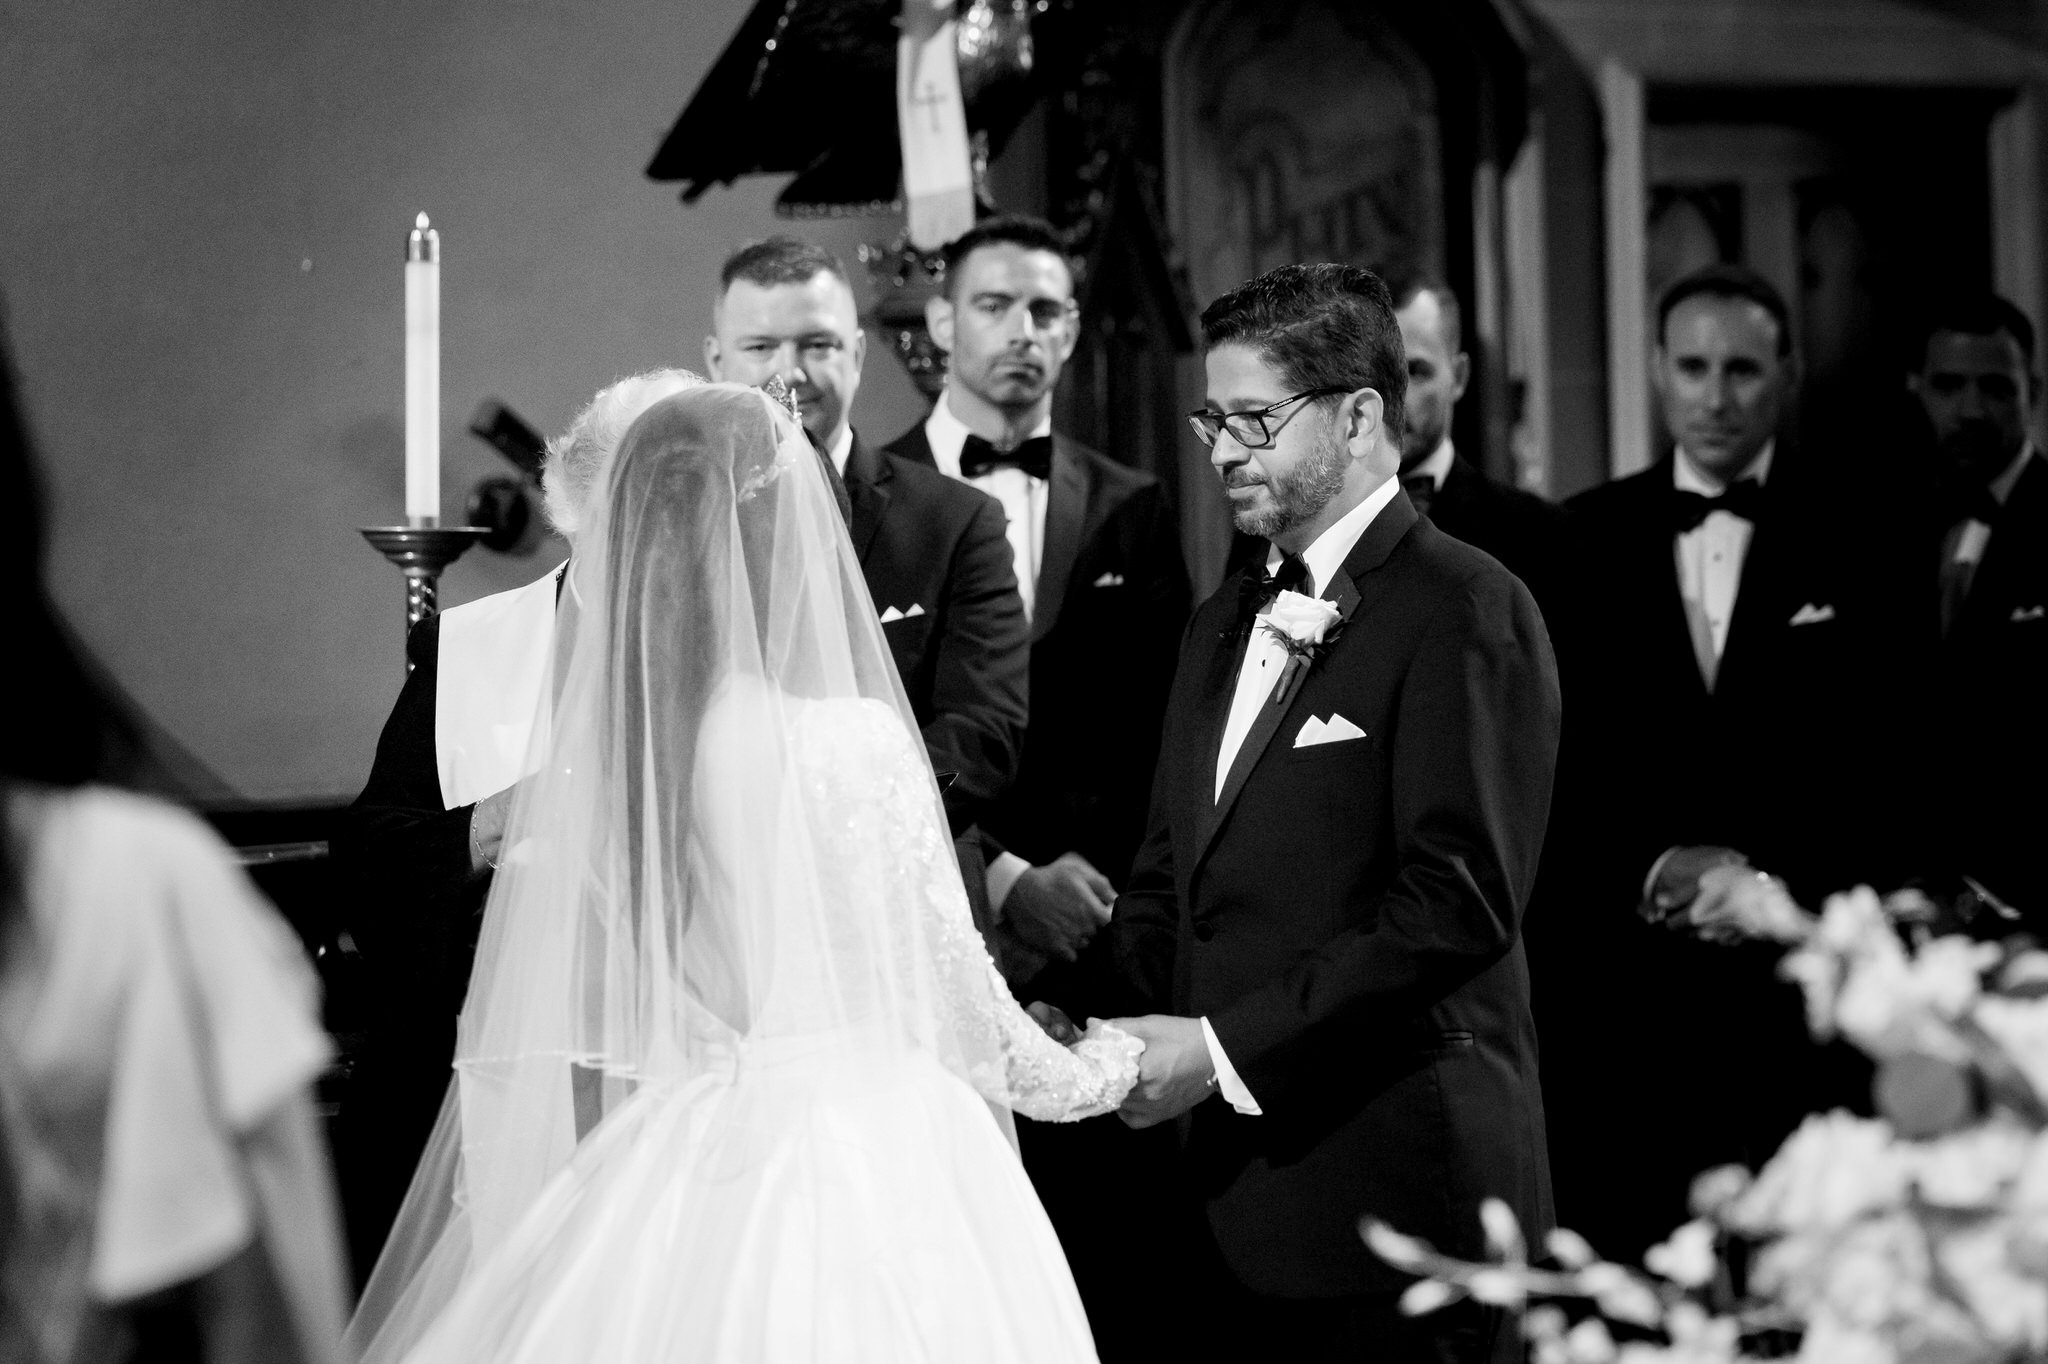 A bride and groom exchange vows at the altar at their Fort Street Presbyterian Church Detroit wedding.